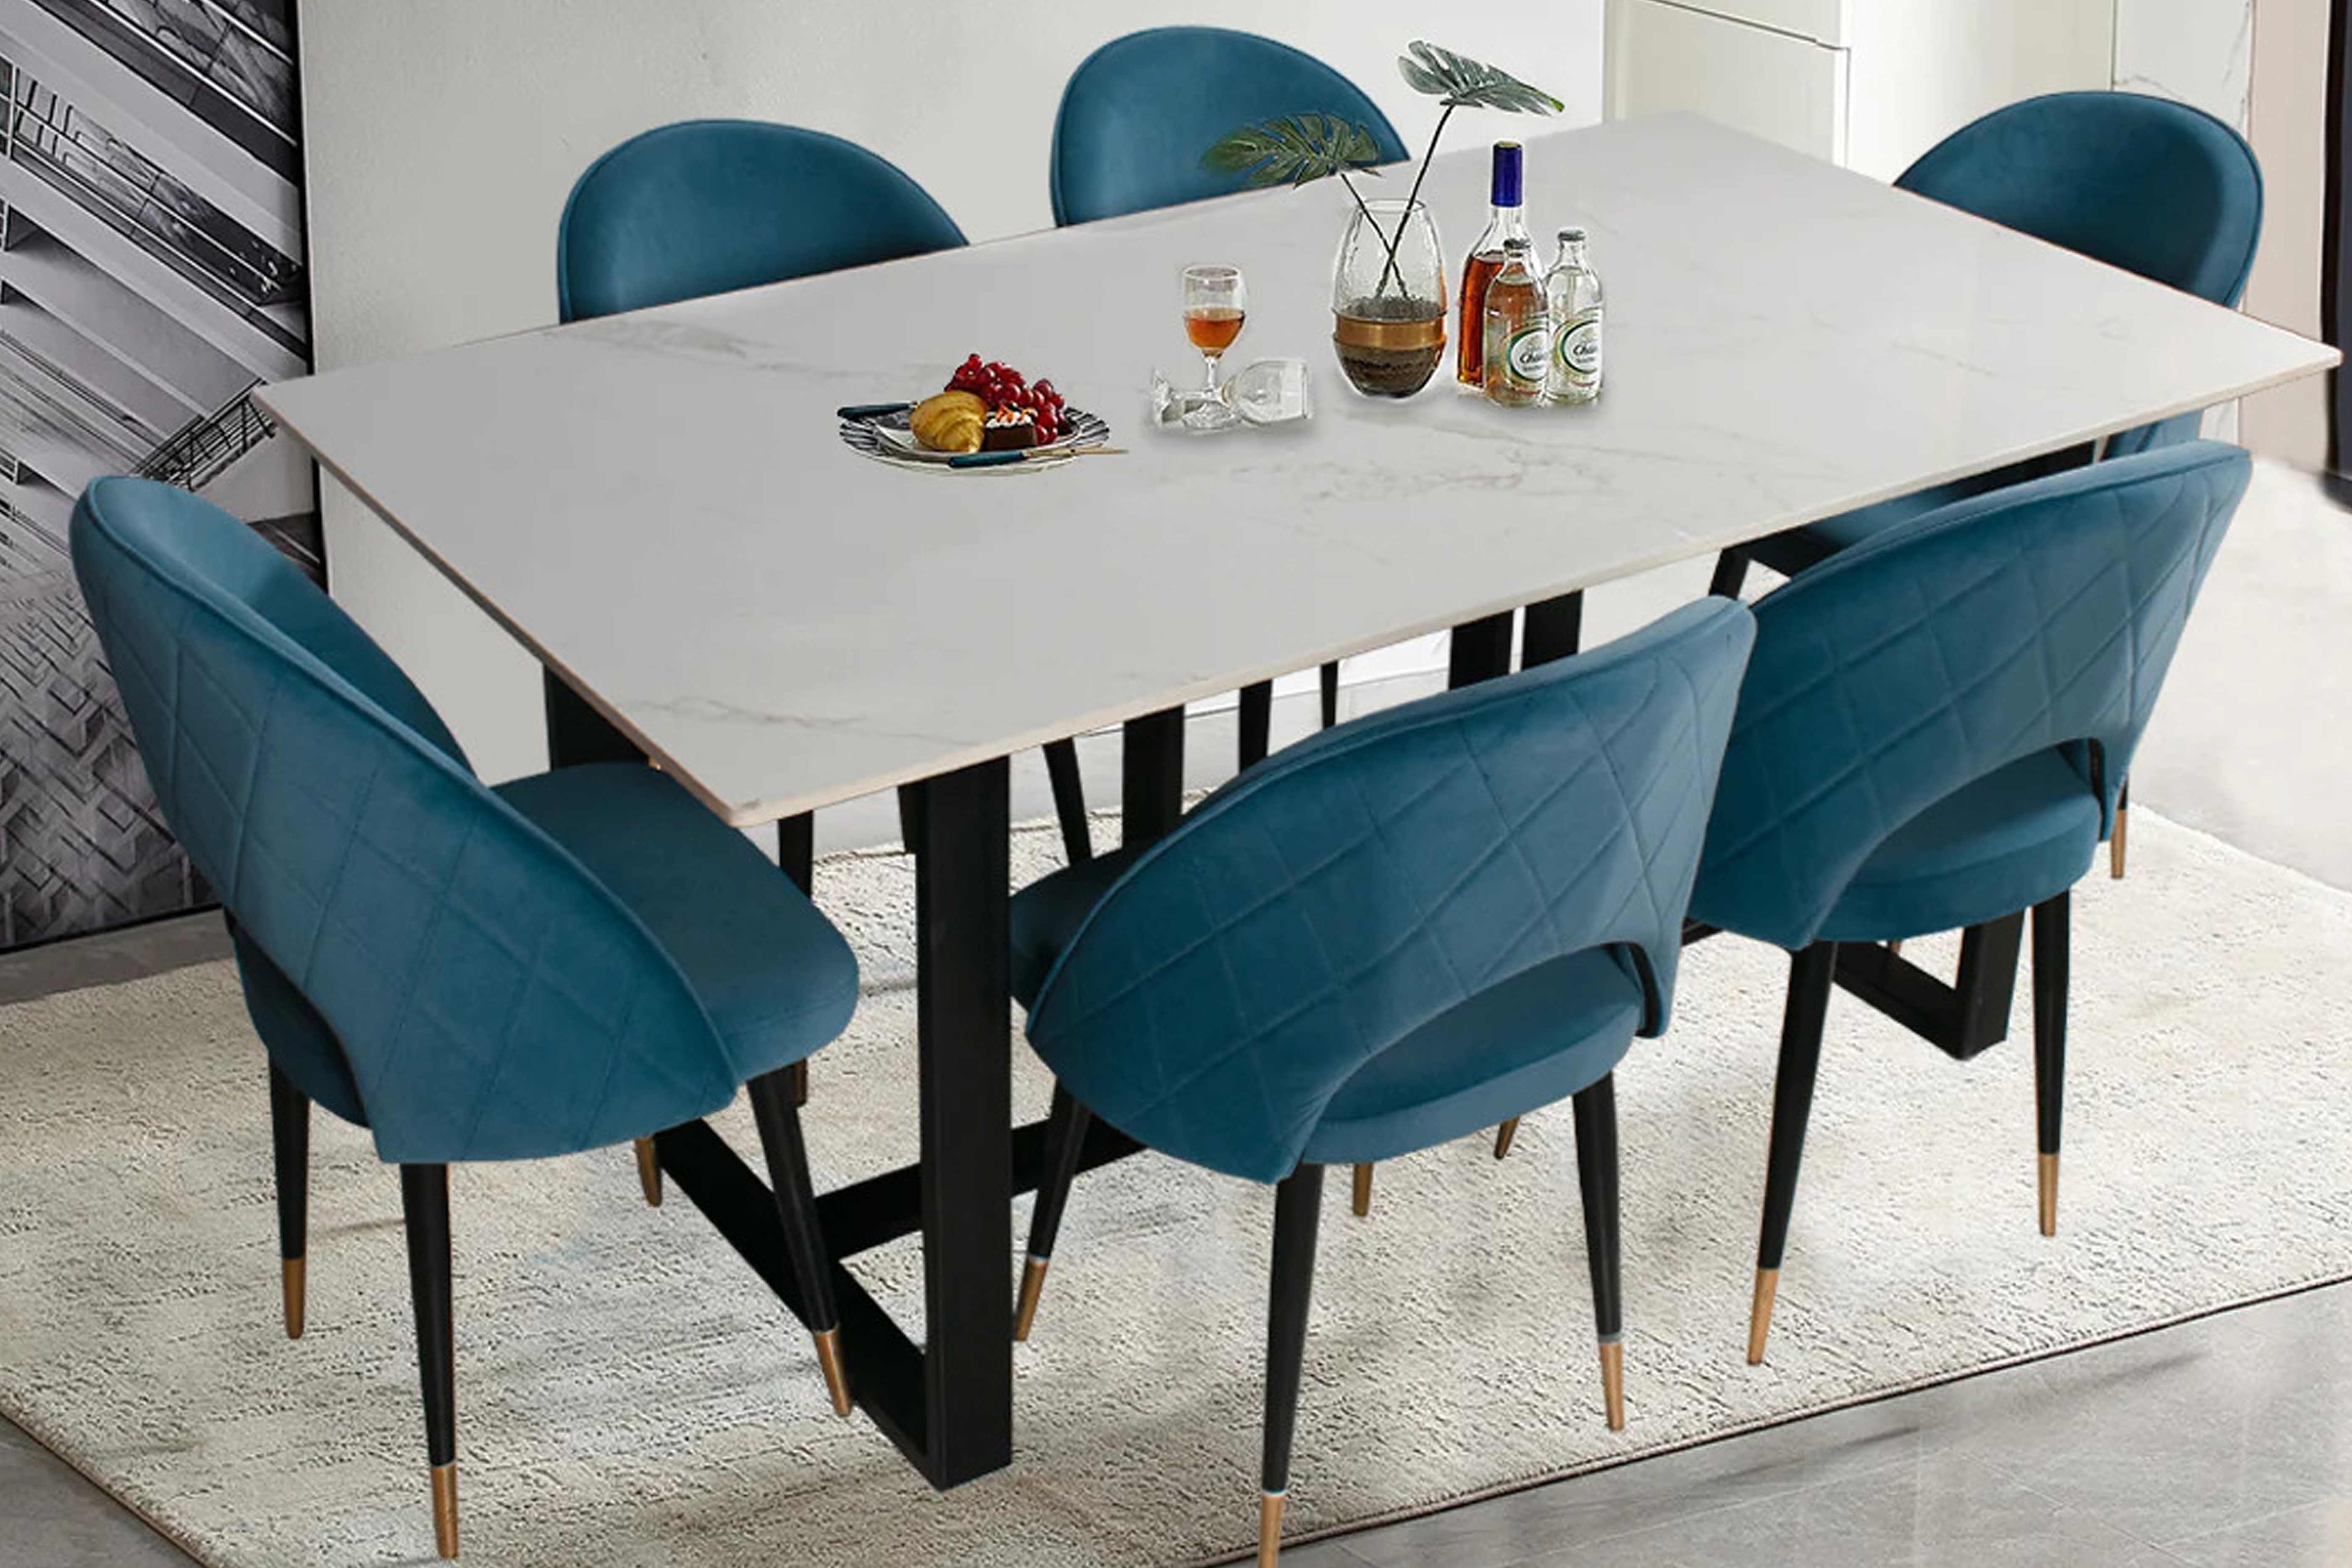 Solimo dining table with 6 chairs